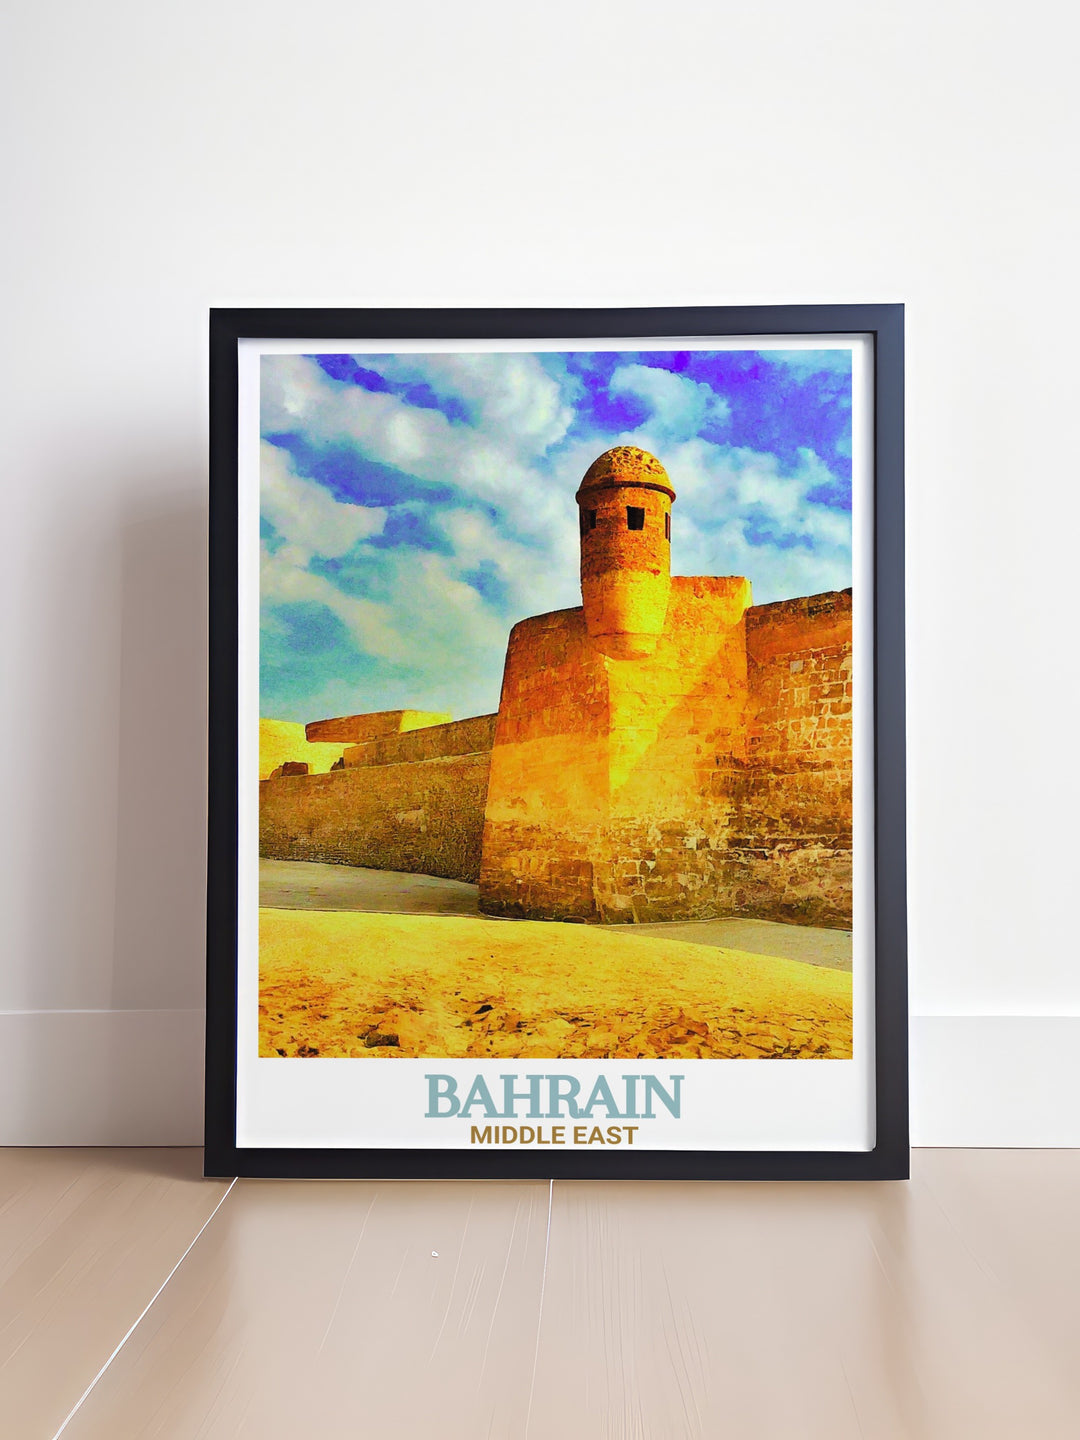 Elegant Bahrain Travel Print of Bahrain Fort capturing the architectural beauty and cultural significance of one of the most famous landmarks in Bahrain.